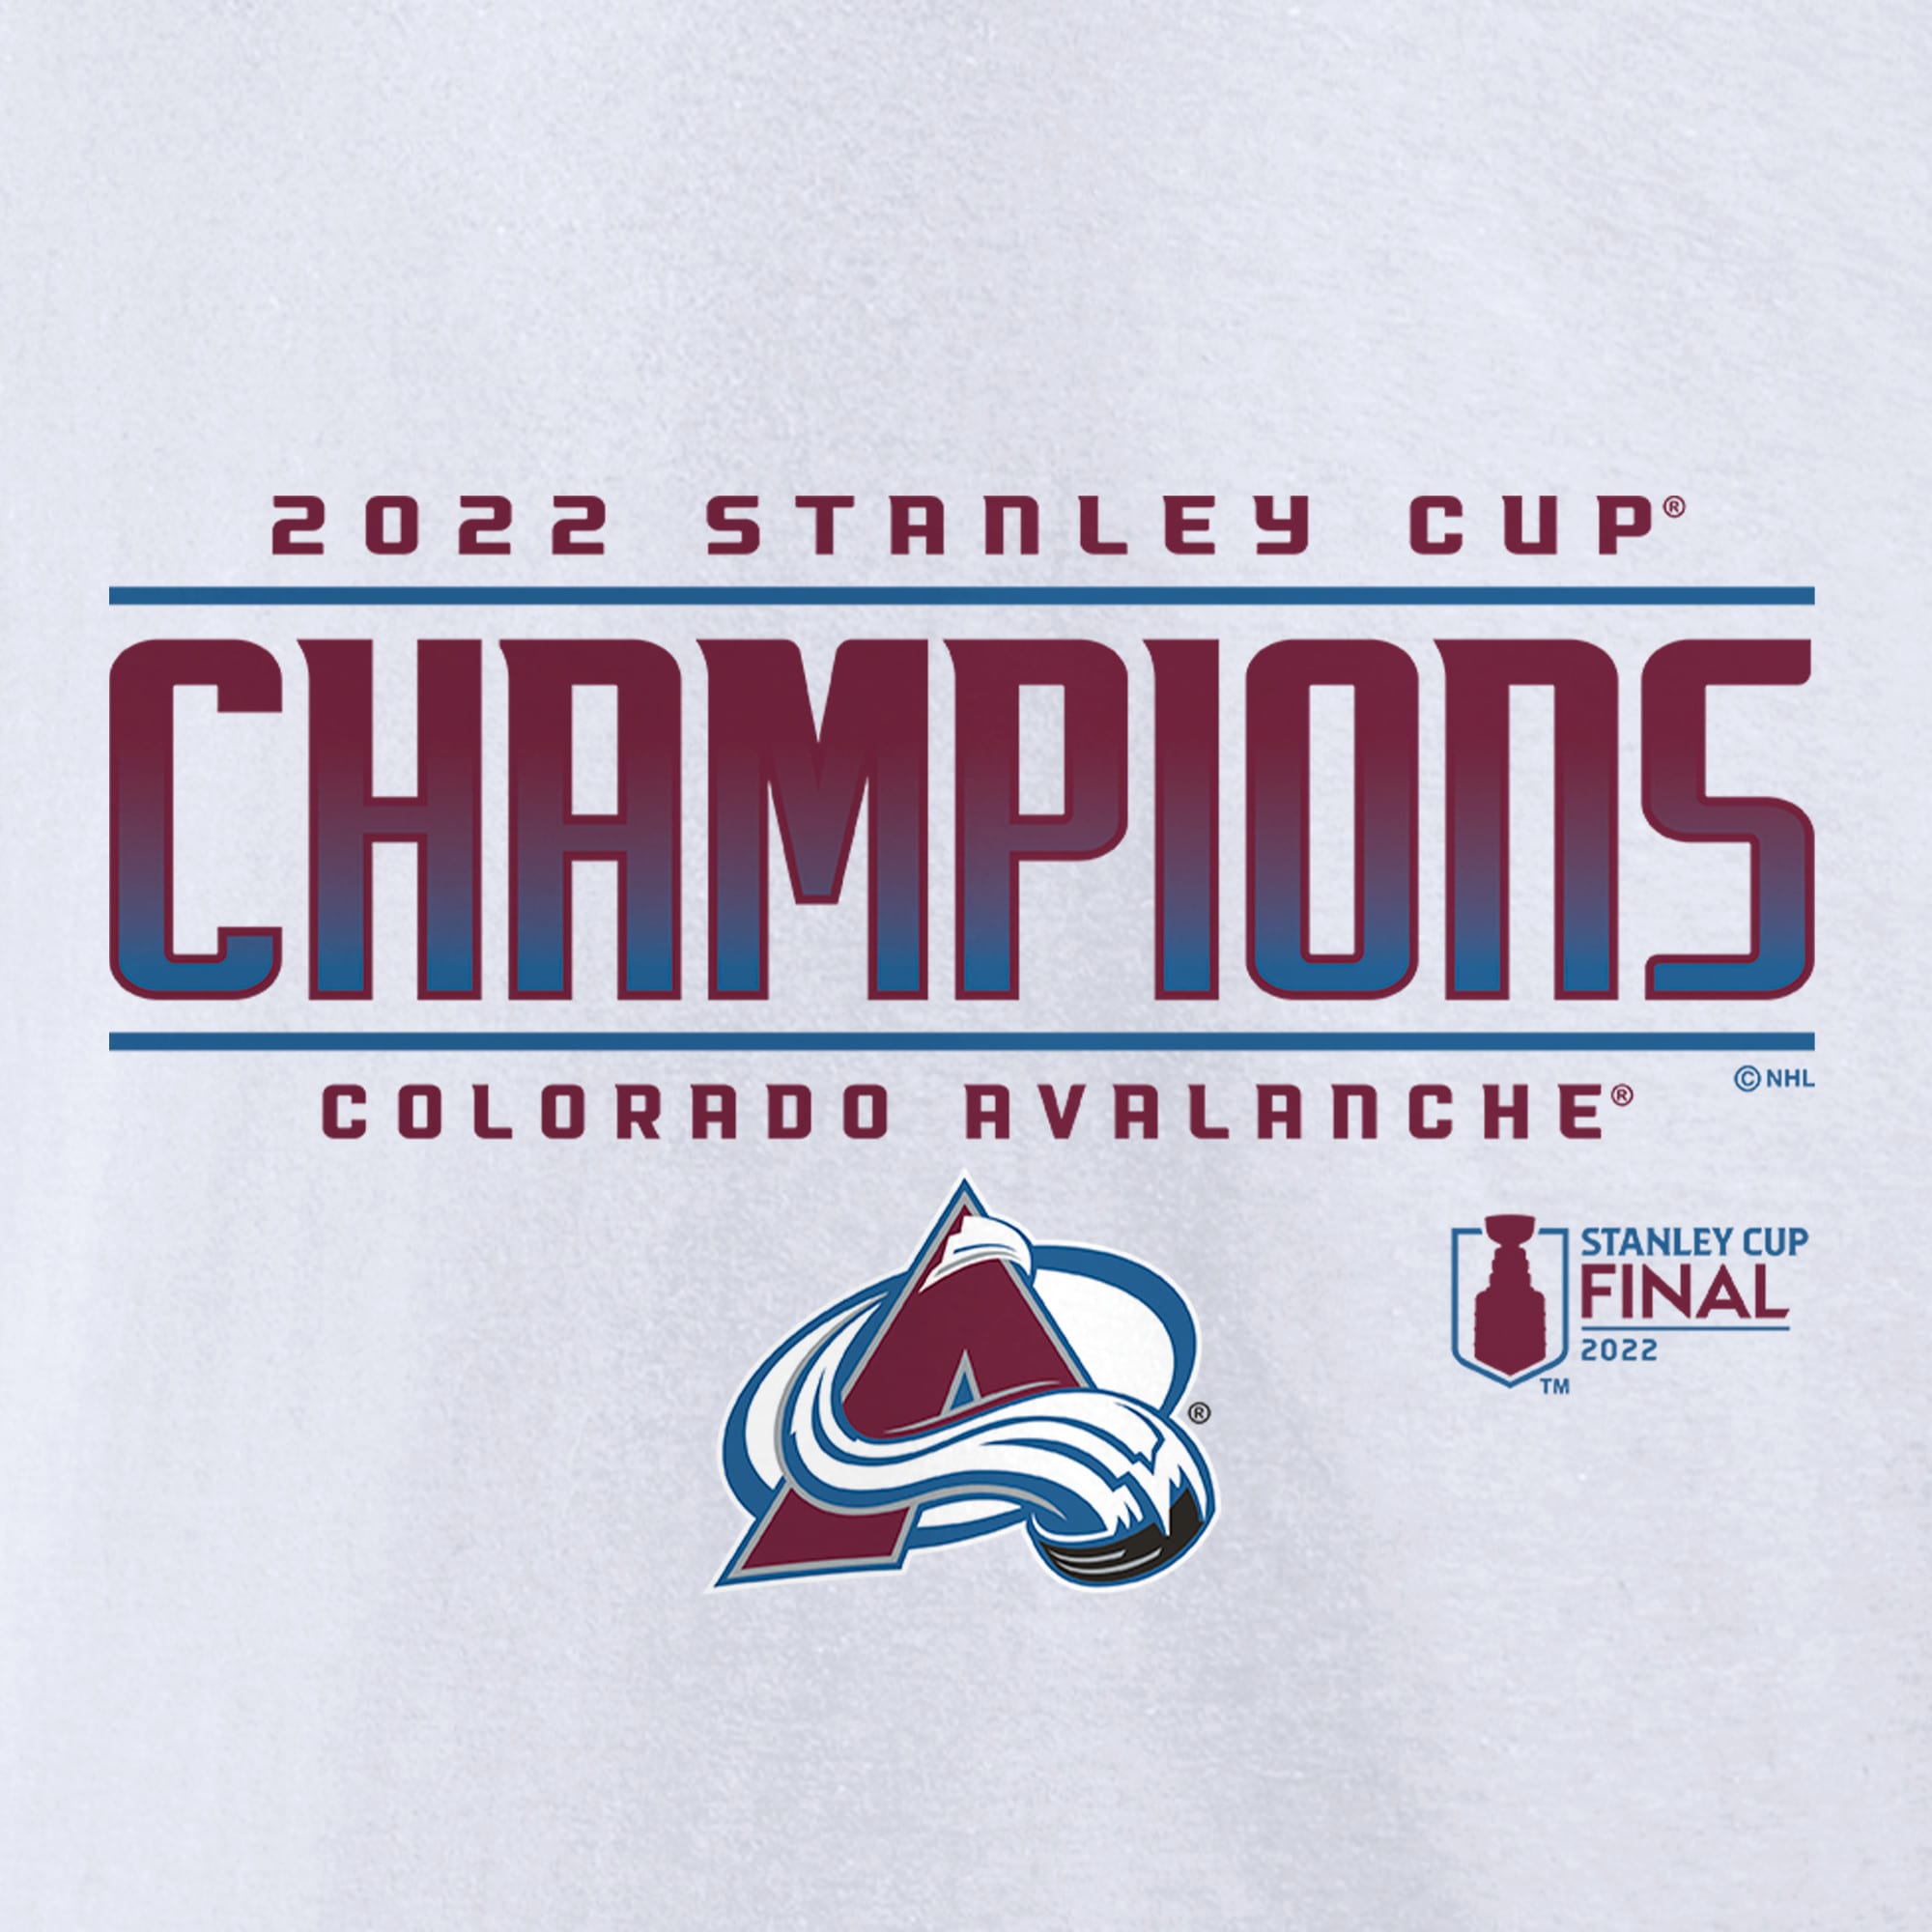 Men's Fanatics Branded White Colorado Avalanche 2022 Stanley Cup Champions Signature Roster T-Shirt - image 4 of 5